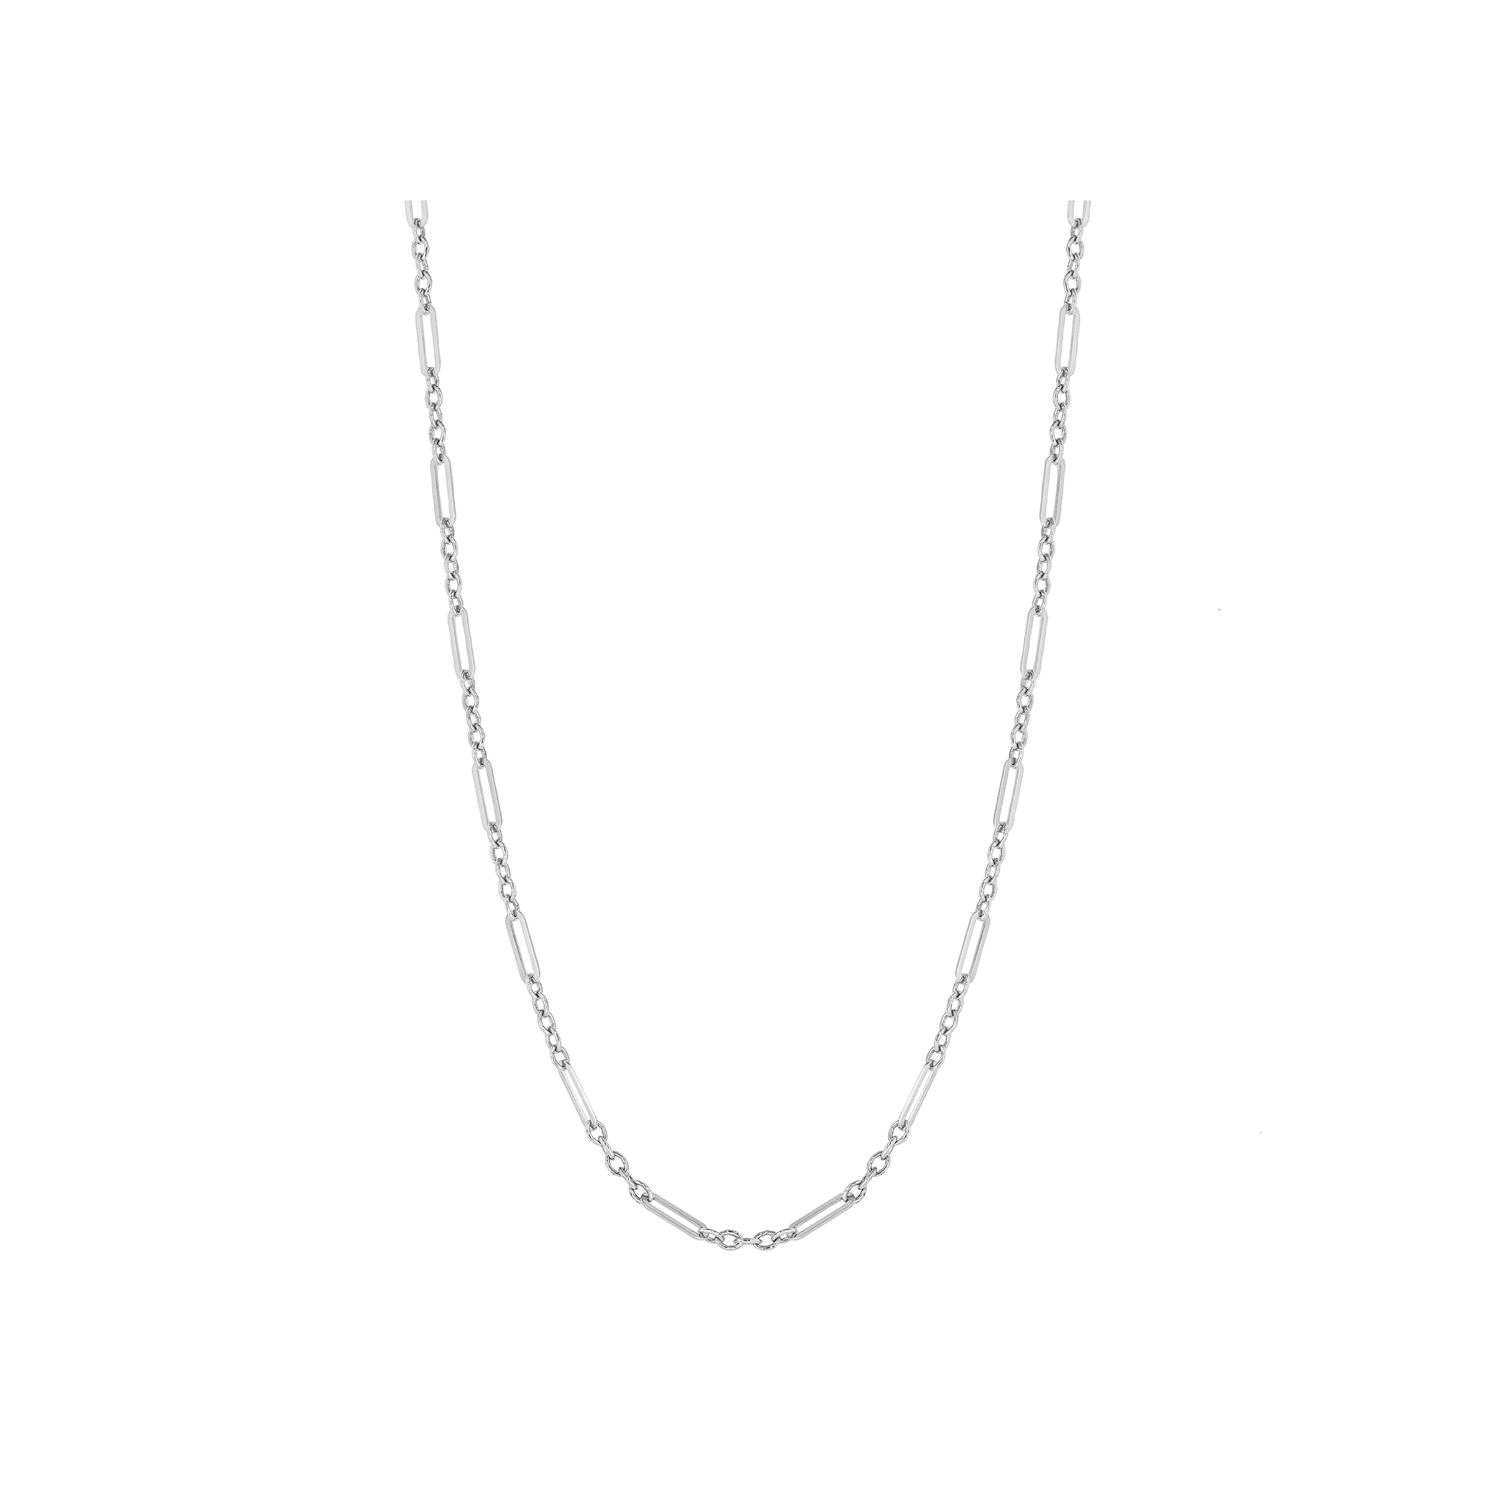 Multi-Link Chain Necklace in 9ct White Gold - Robert Anthony Jewellers, Edinburgh